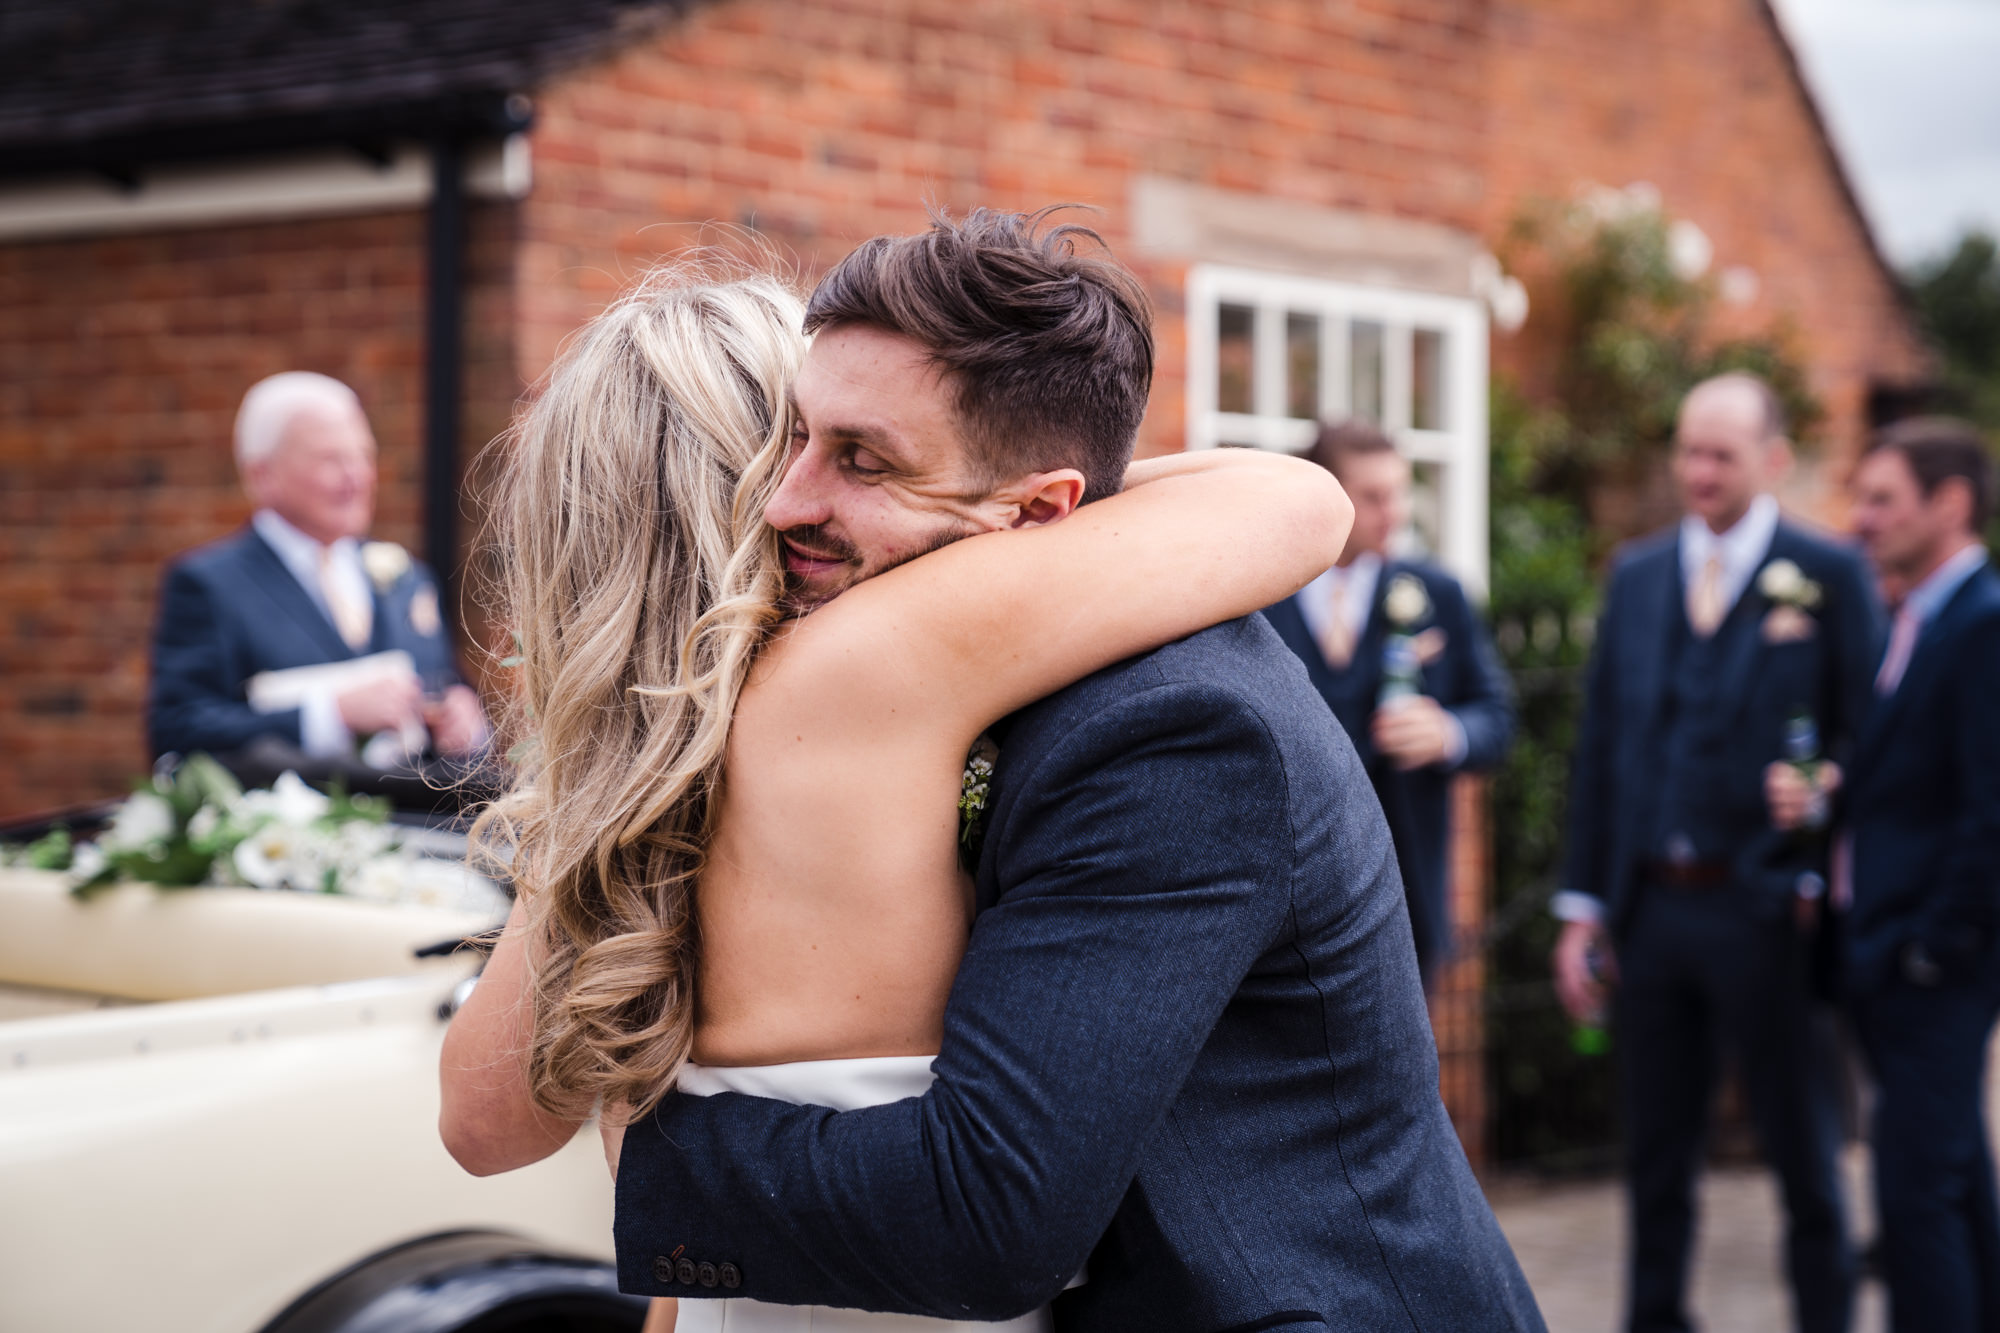 a smiling groom hugs a guest at his wedding reception